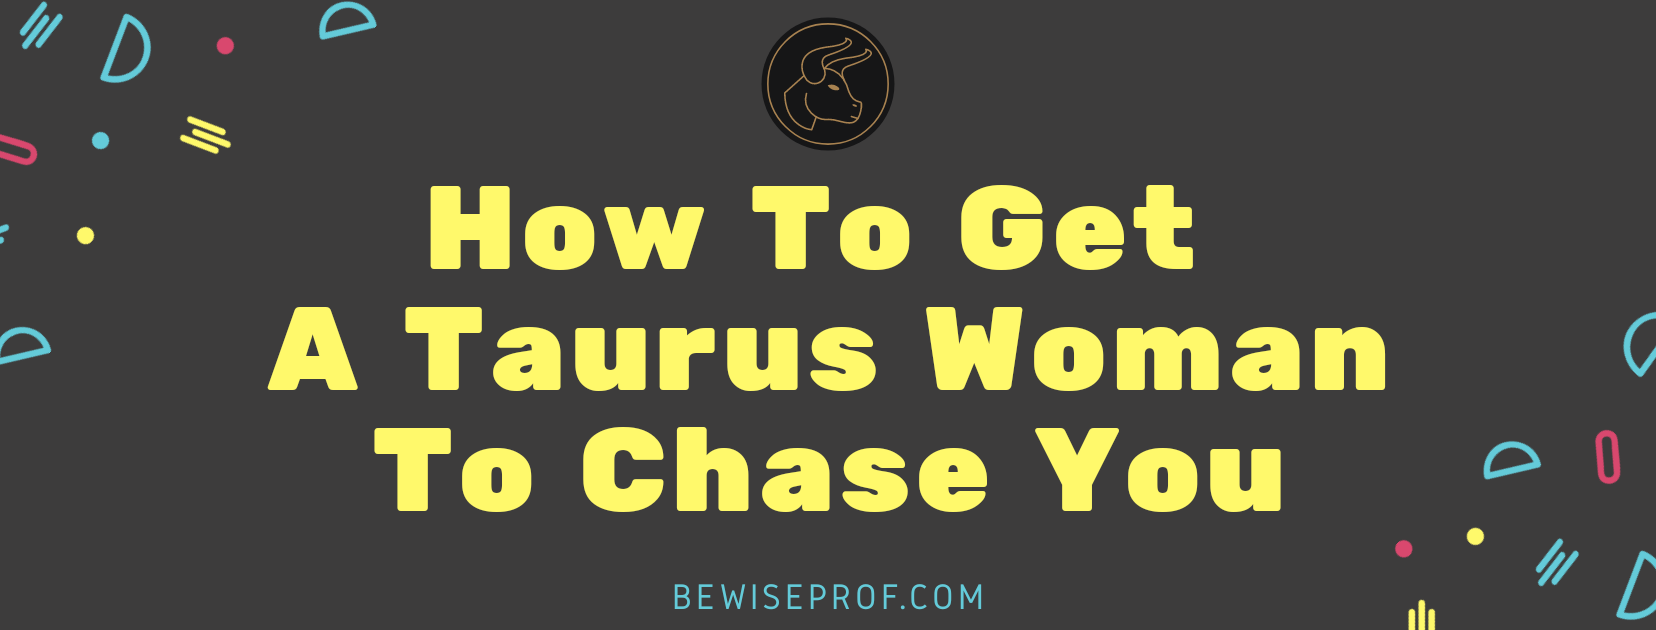 How to get a Taurus woman to chase you